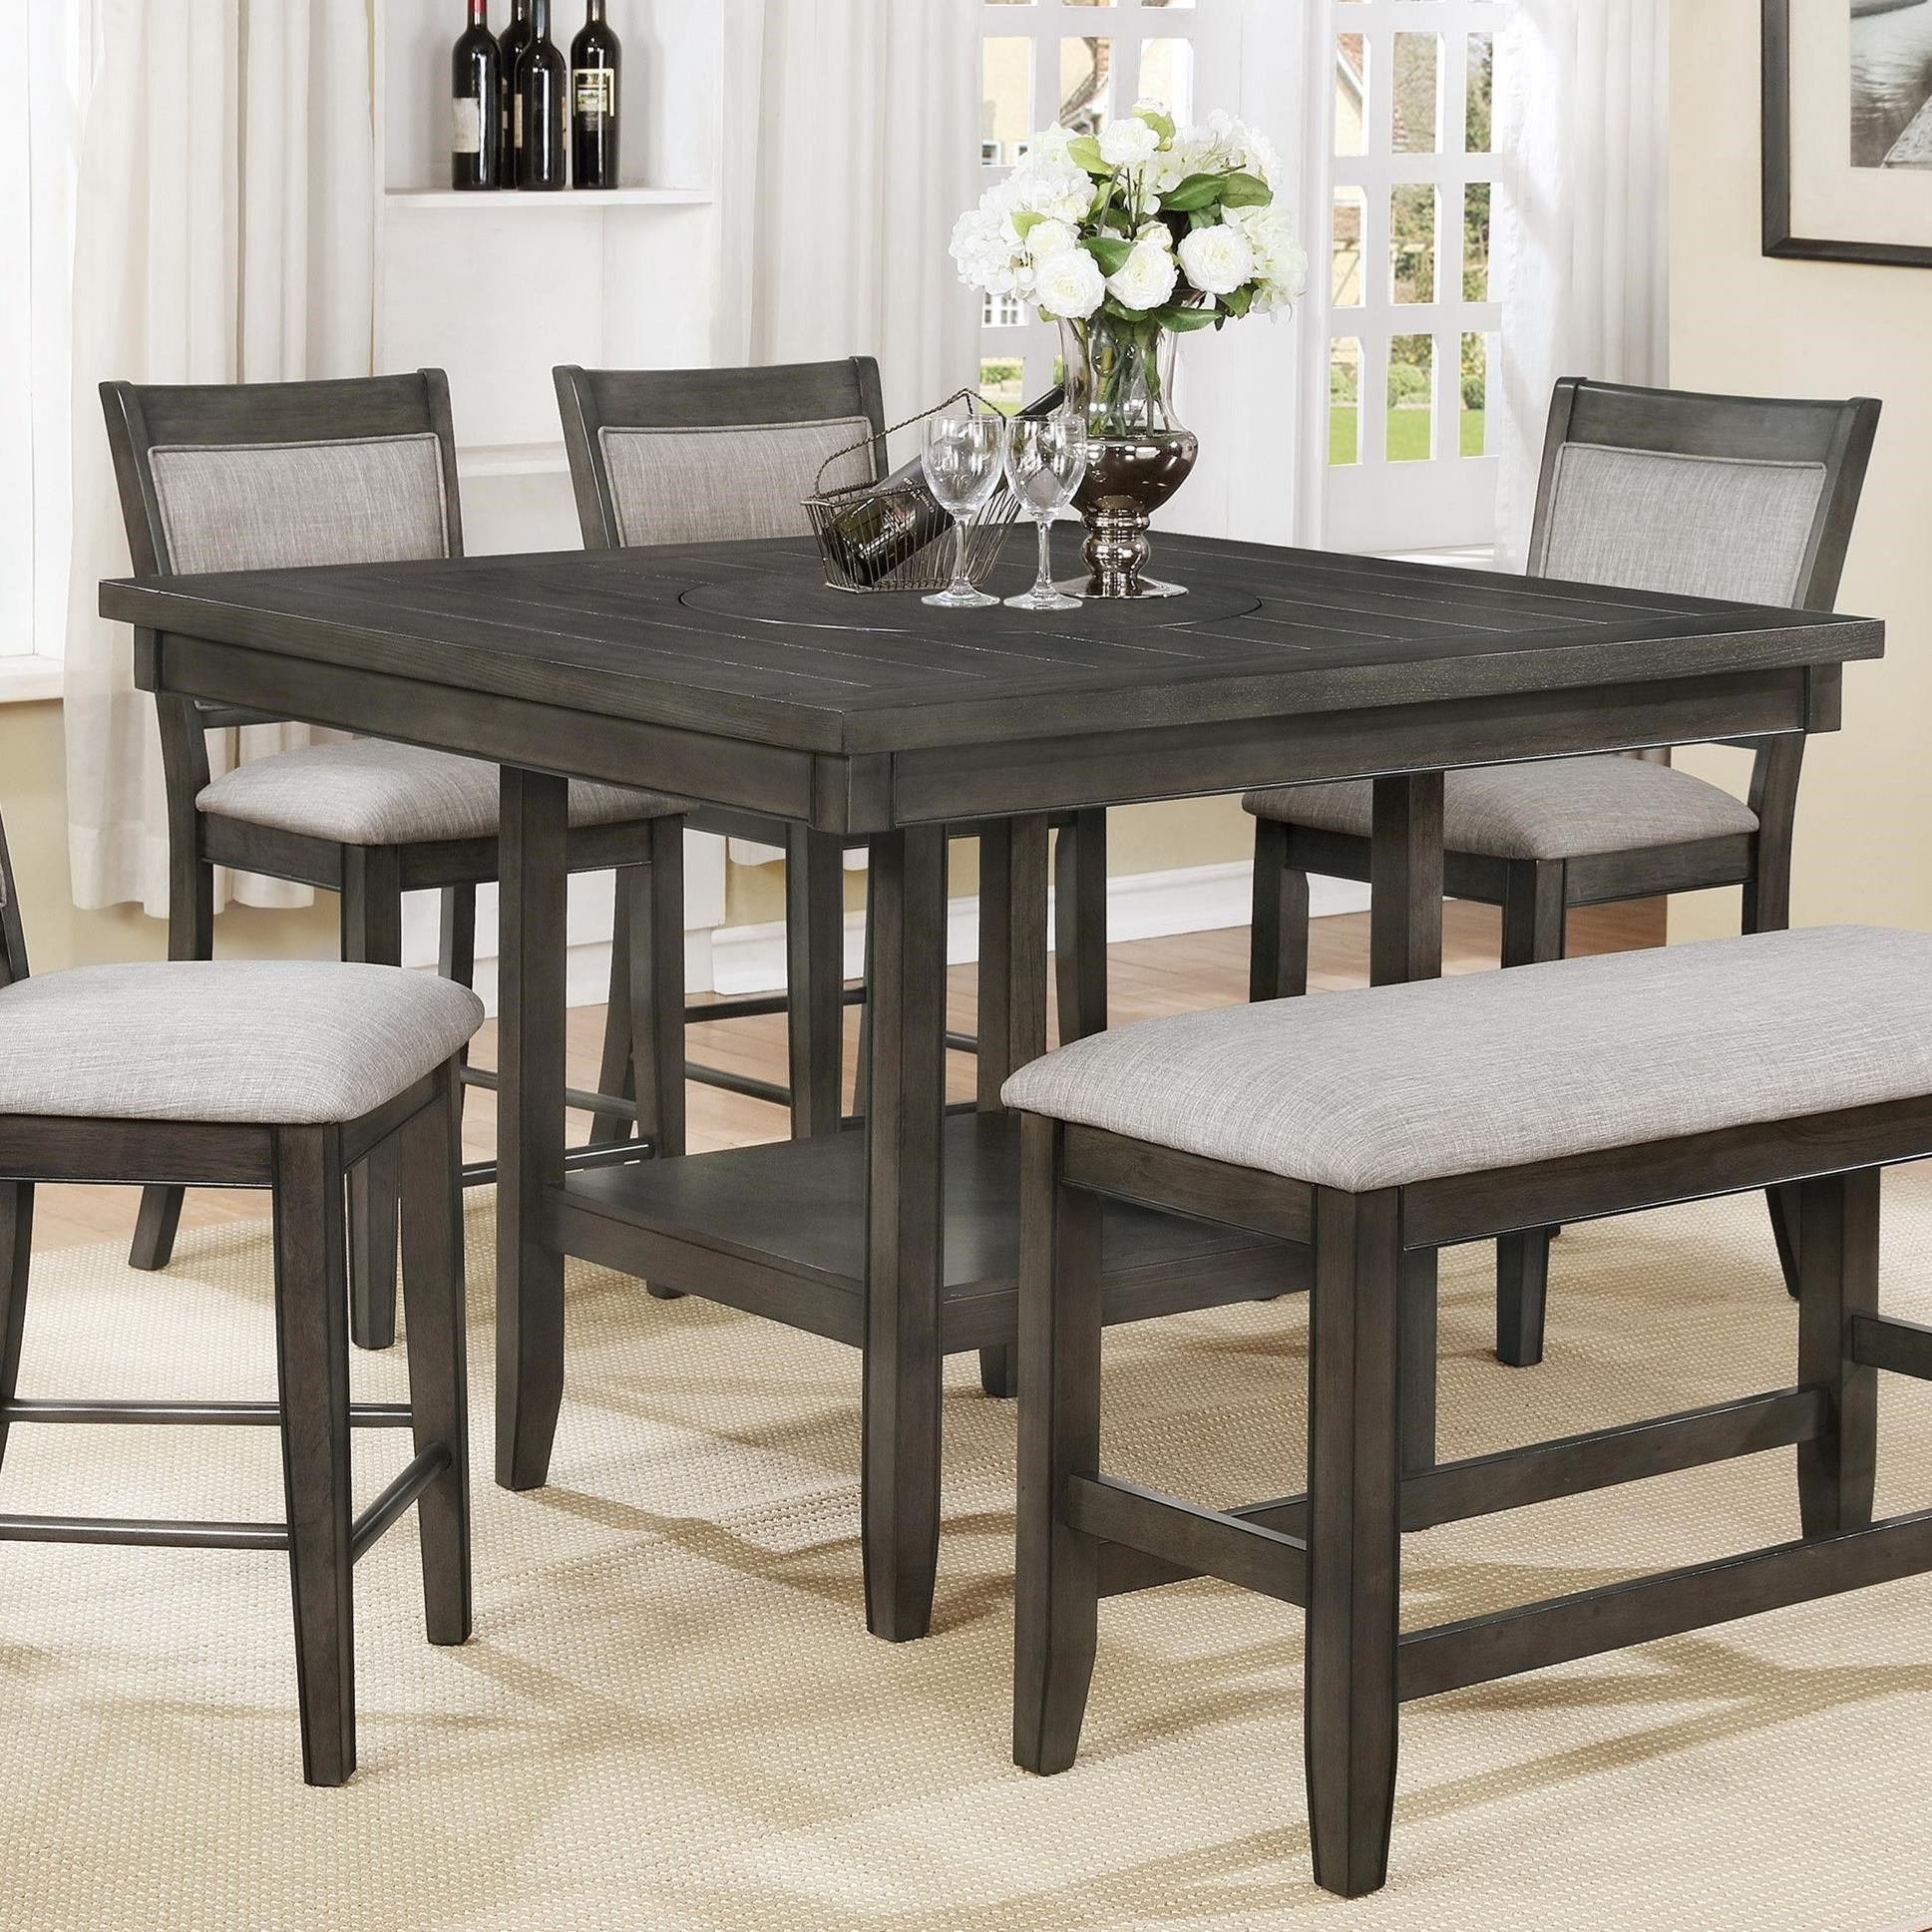 25 Collection of Avondale Counter-Height Dining Tables | Dining Room Ideas